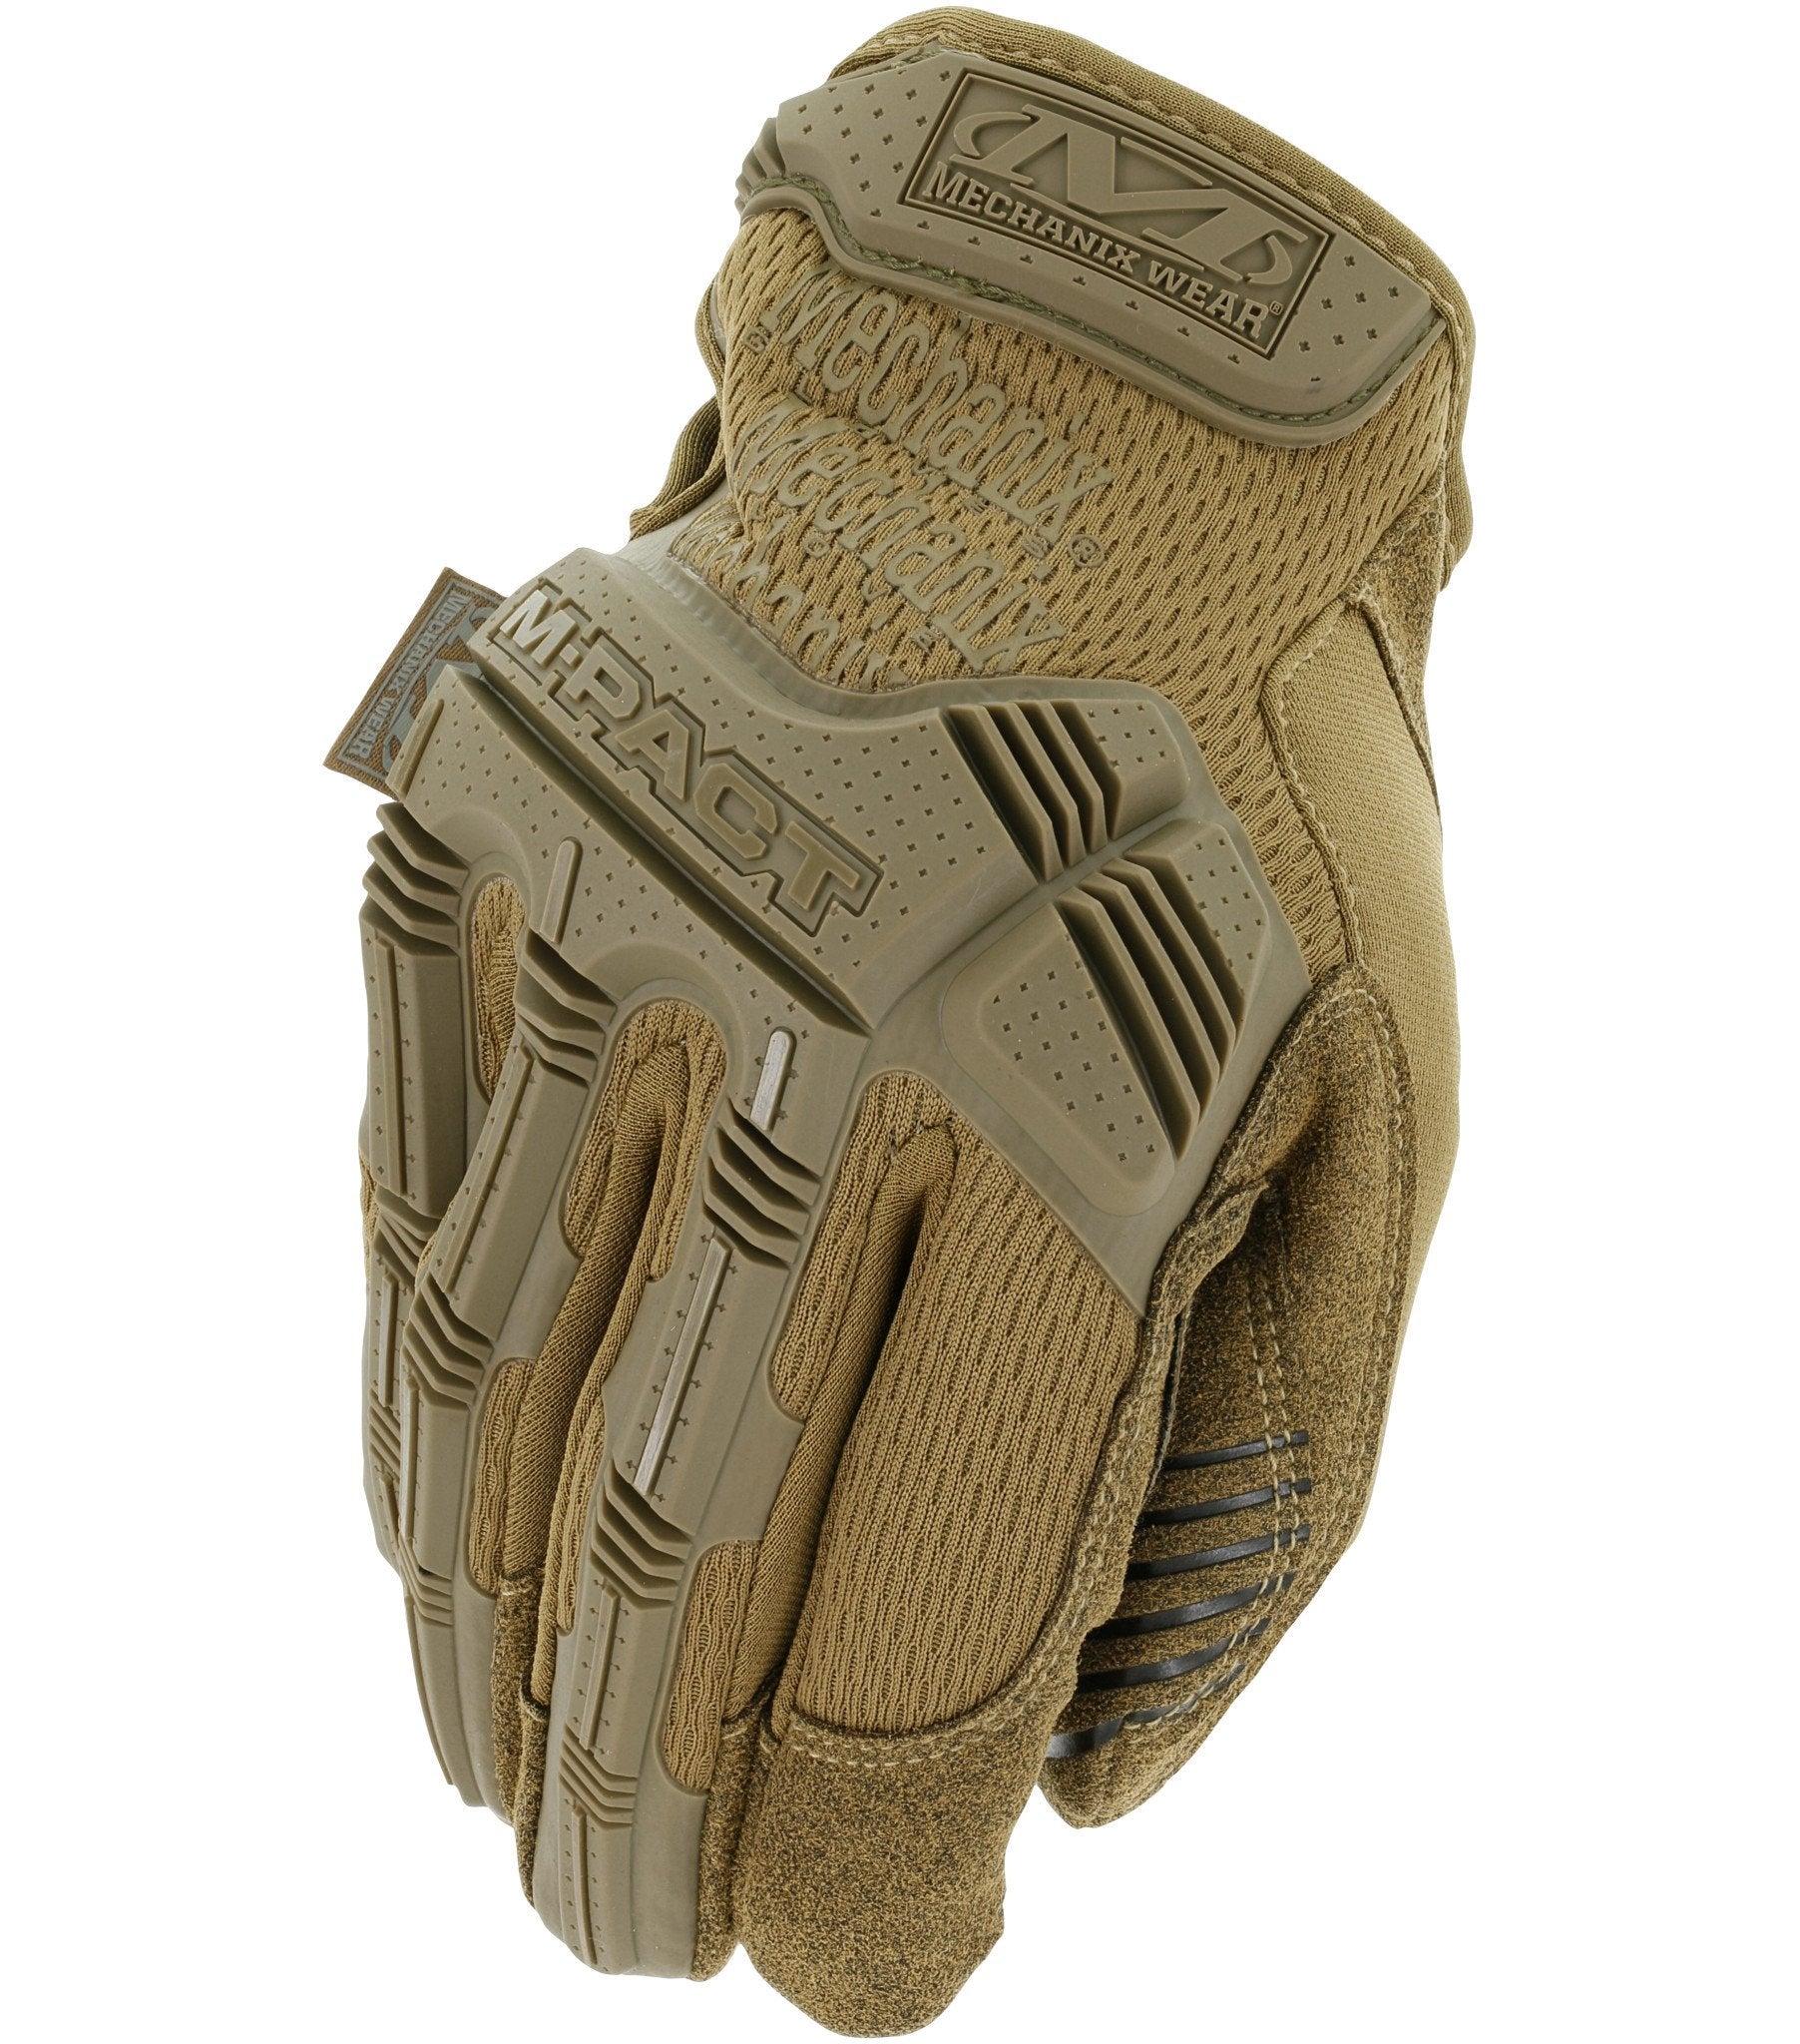 Mechanix Wear: M-Pact Tactical Gloves with Secure Fit, Touchscreen Capable  Safety Gloves for Men, Work Gloves with Impact Protection and Vibration